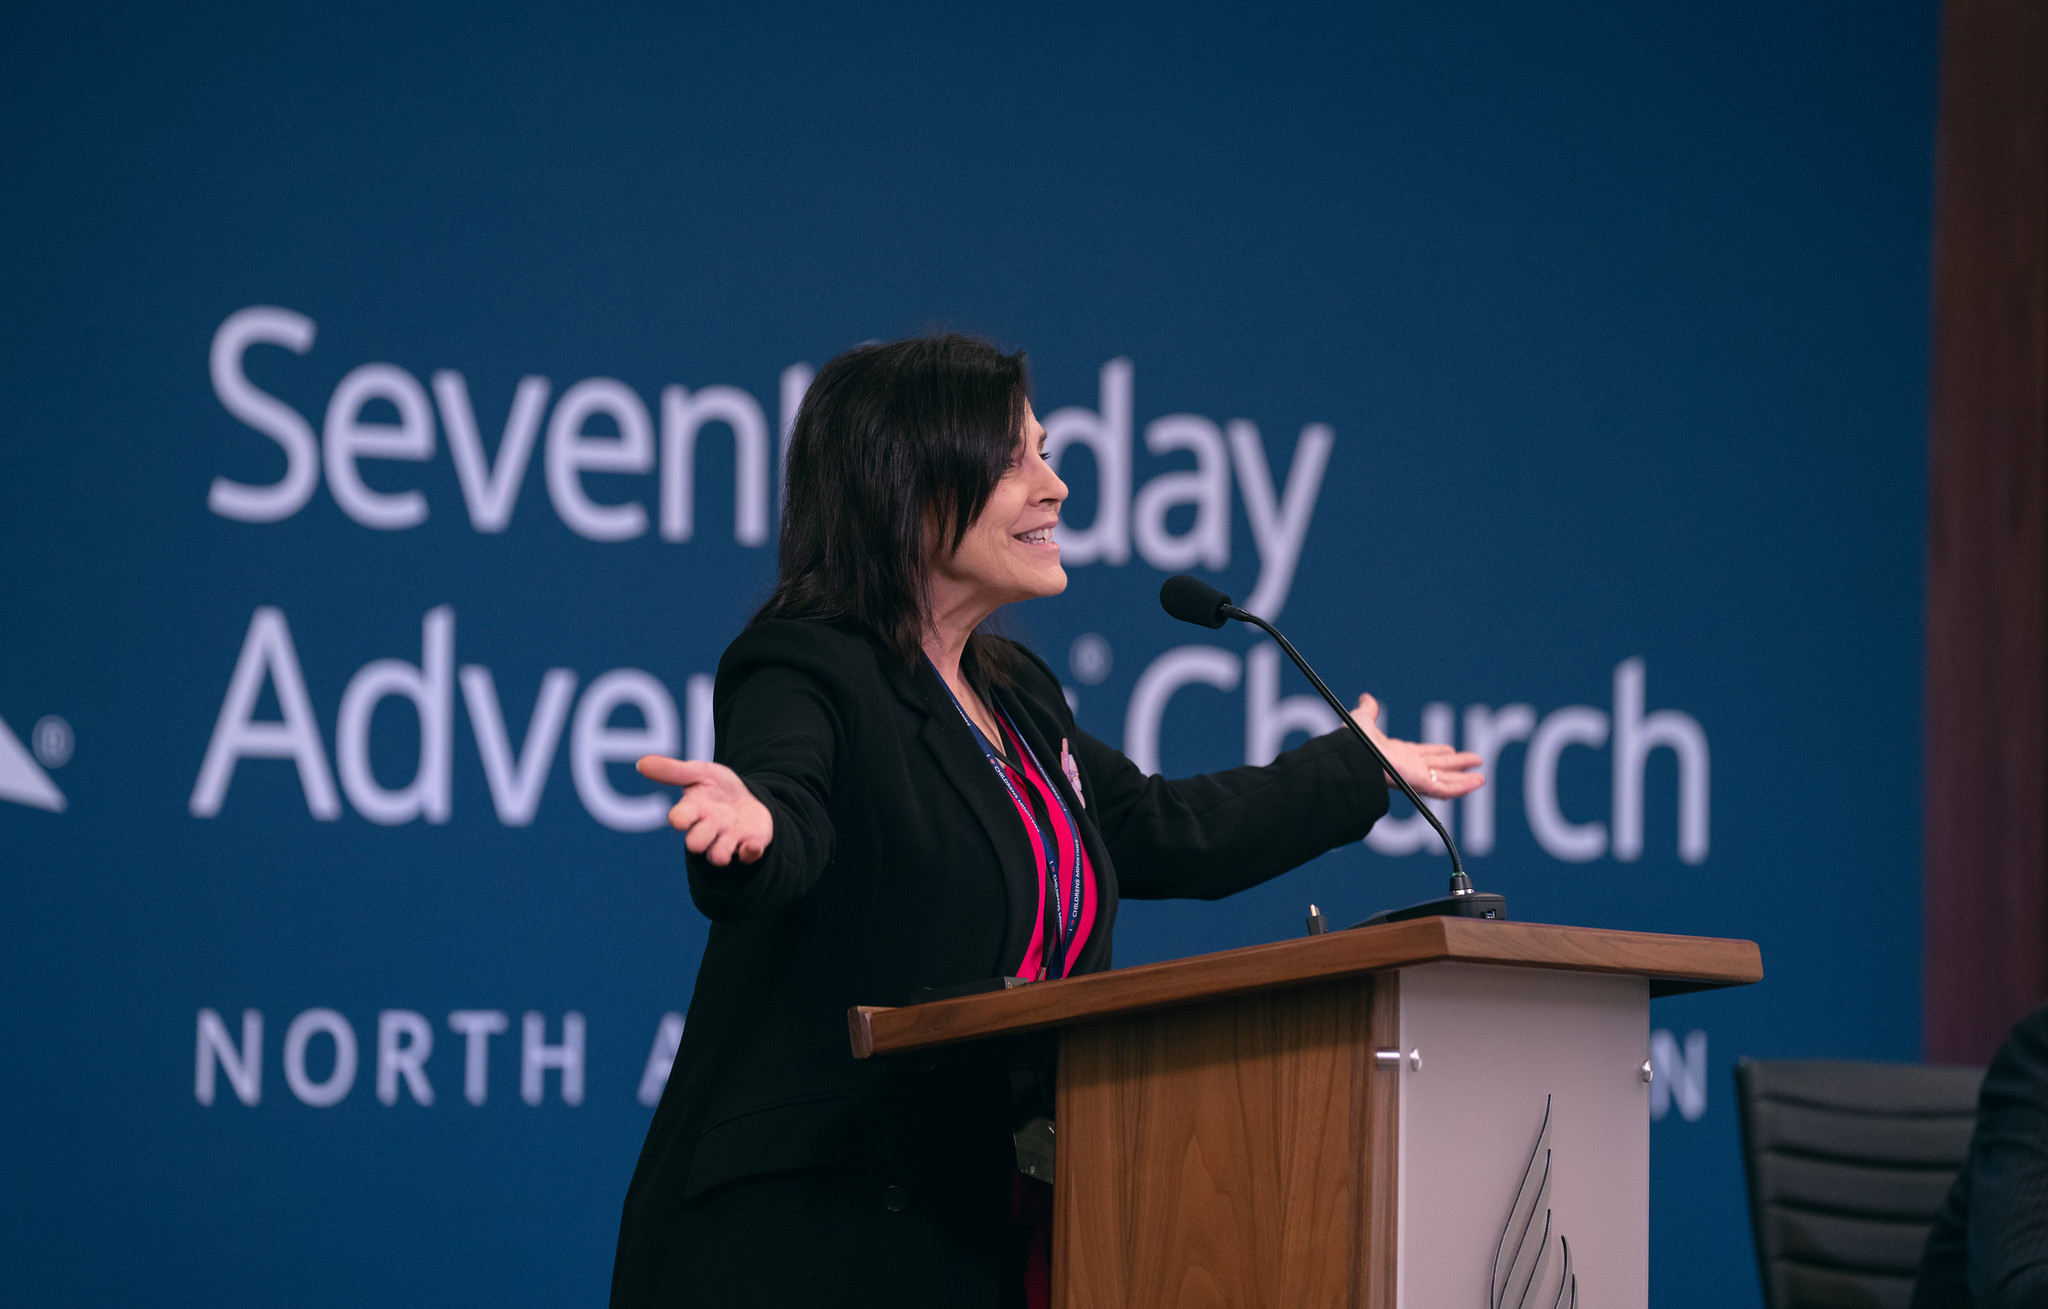 Sherri Uhrig, NAD Children's Ministries director, talks about the new Sabbath School curriculum and pilot program on Oct. 31, 2022, day five of the NAD Year-End Meeting. Photo by Pieter Damsteegt